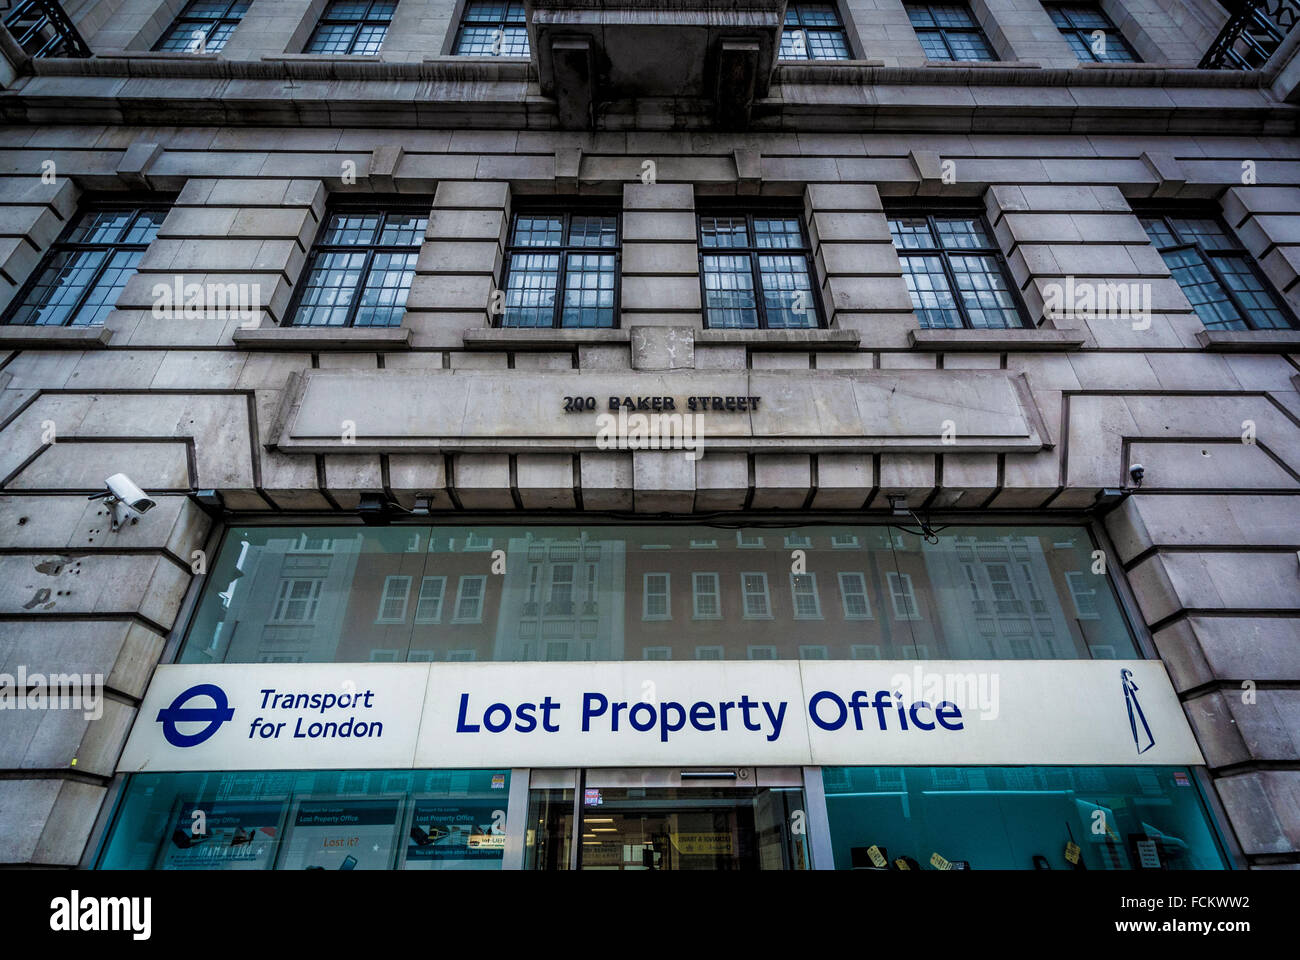 Transport for London Lost Property Office, Londres, Royaume-Uni. Banque D'Images